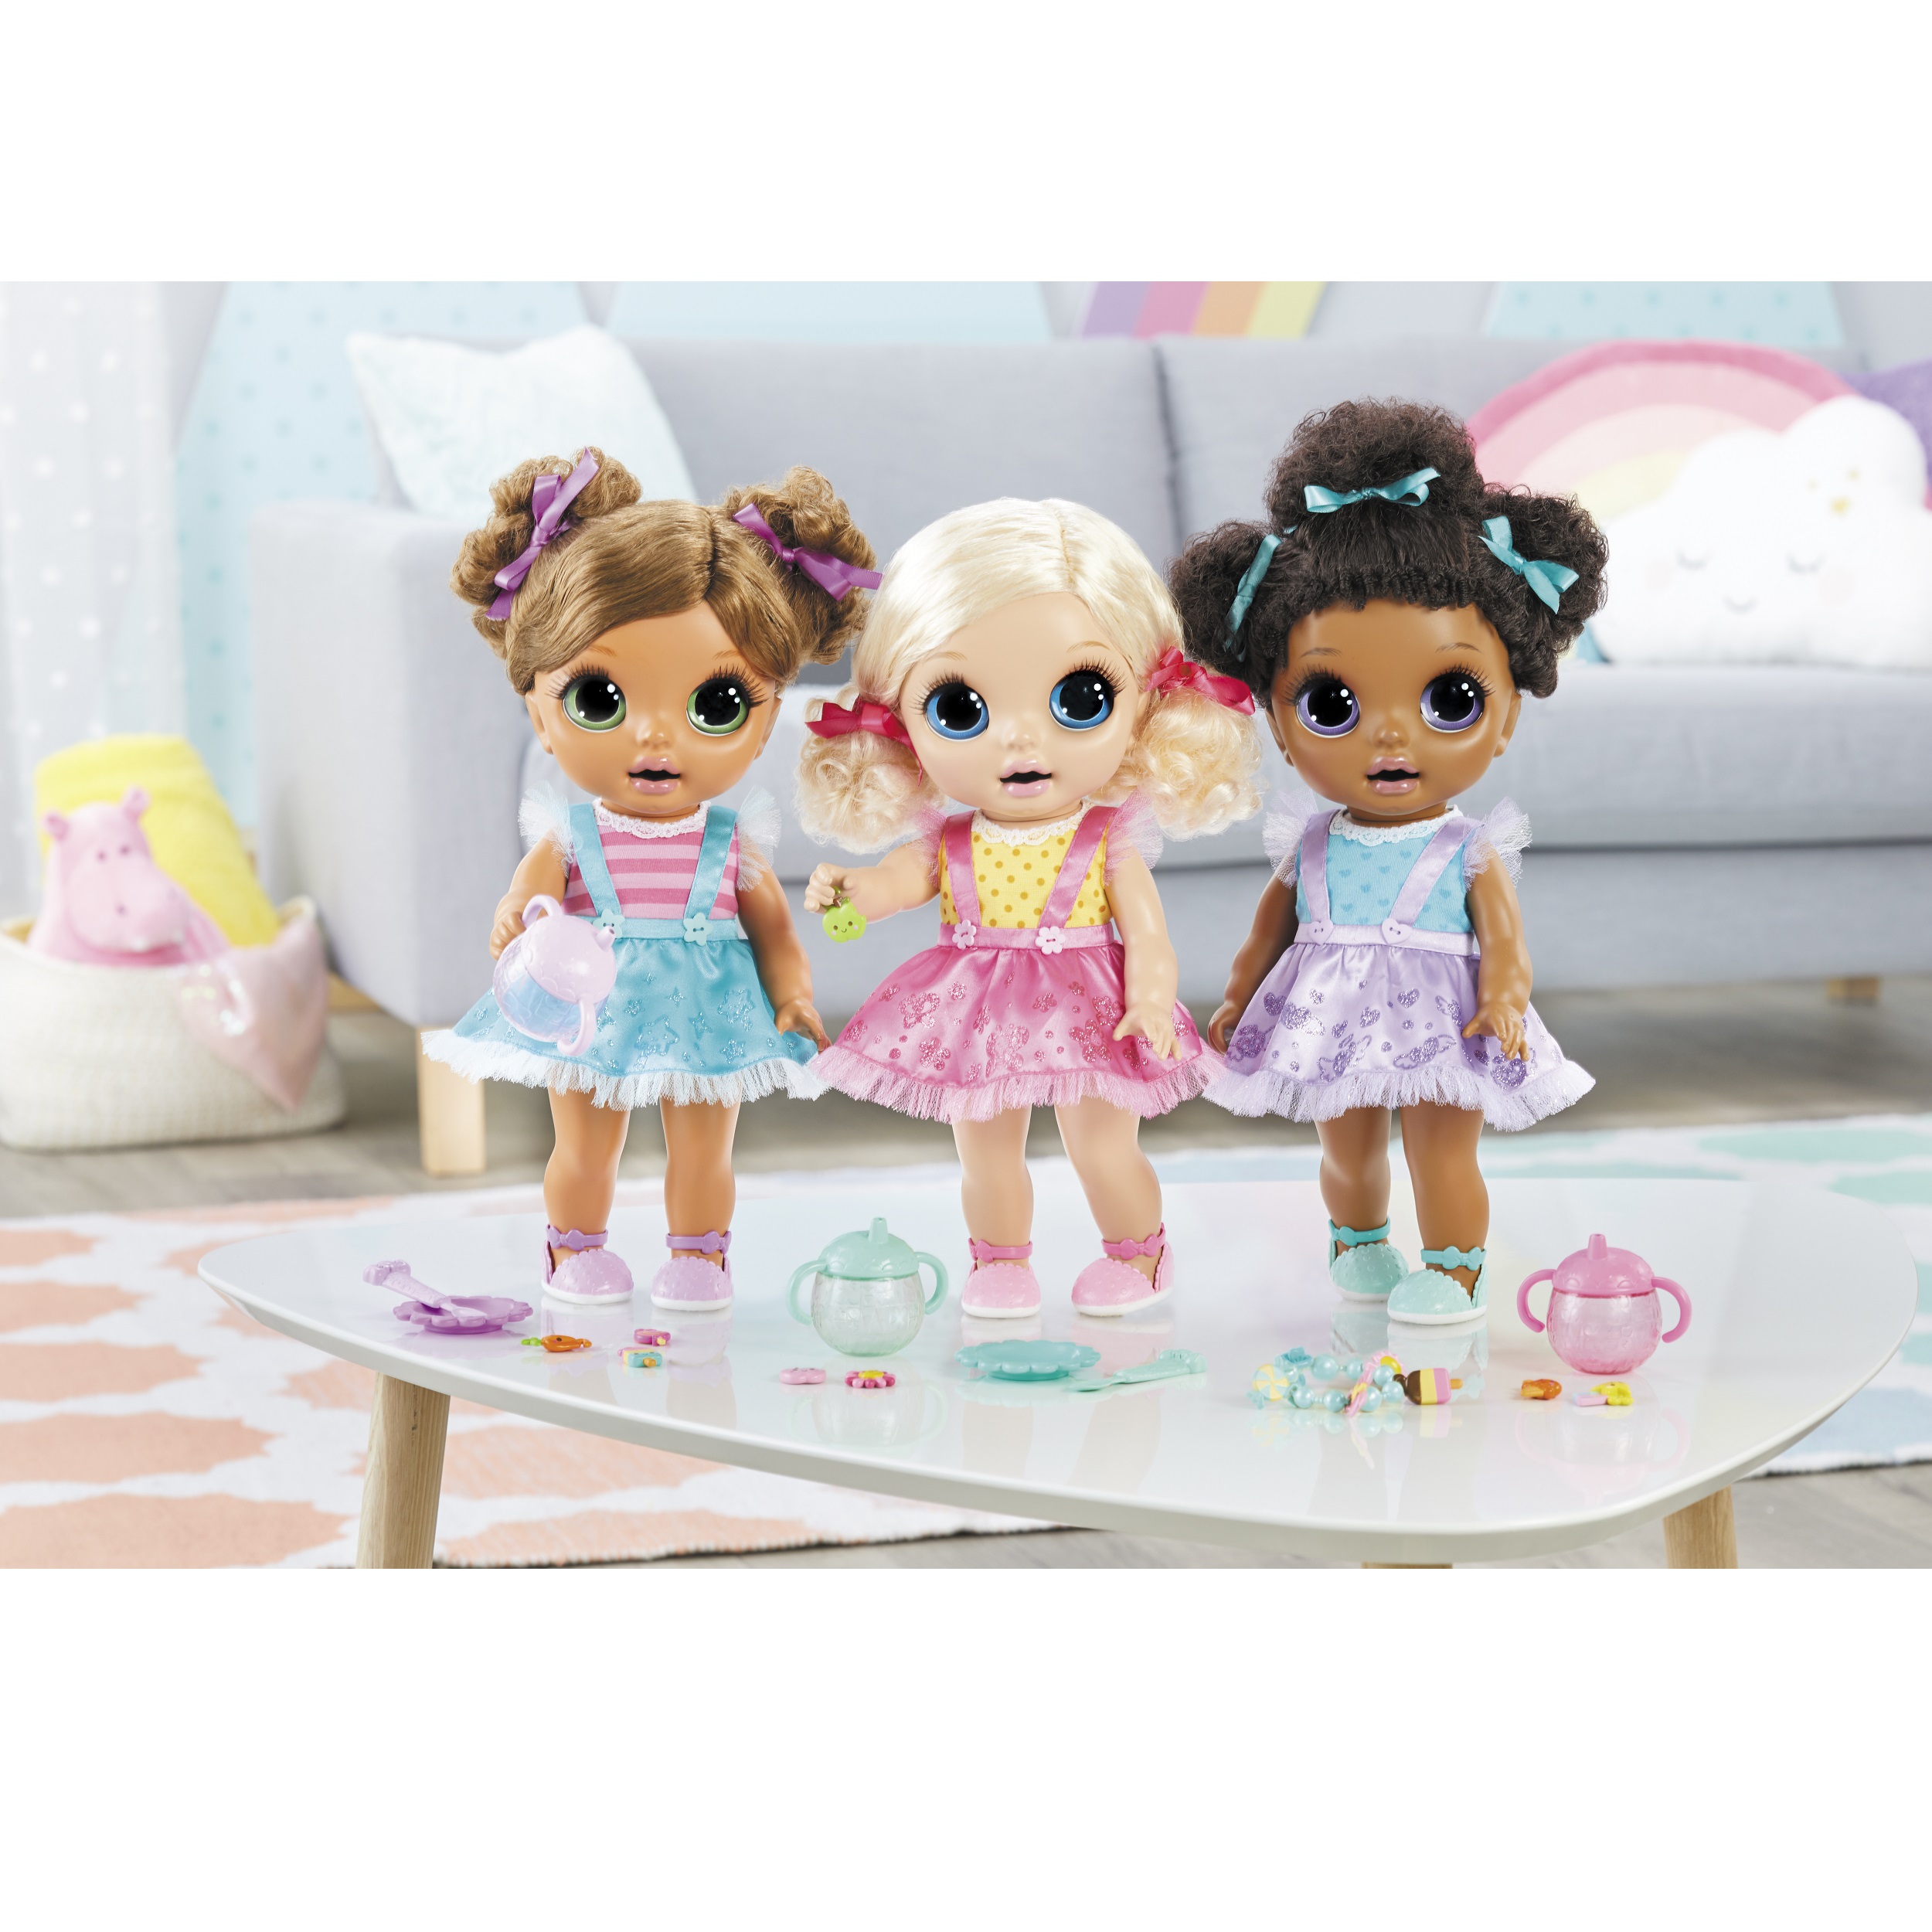 Baby Born Surprise Magic Potty Surprise Blue Eyes – Doll Pees Glitter & Poops Surprise Charms Doll Playset - image 3 of 8